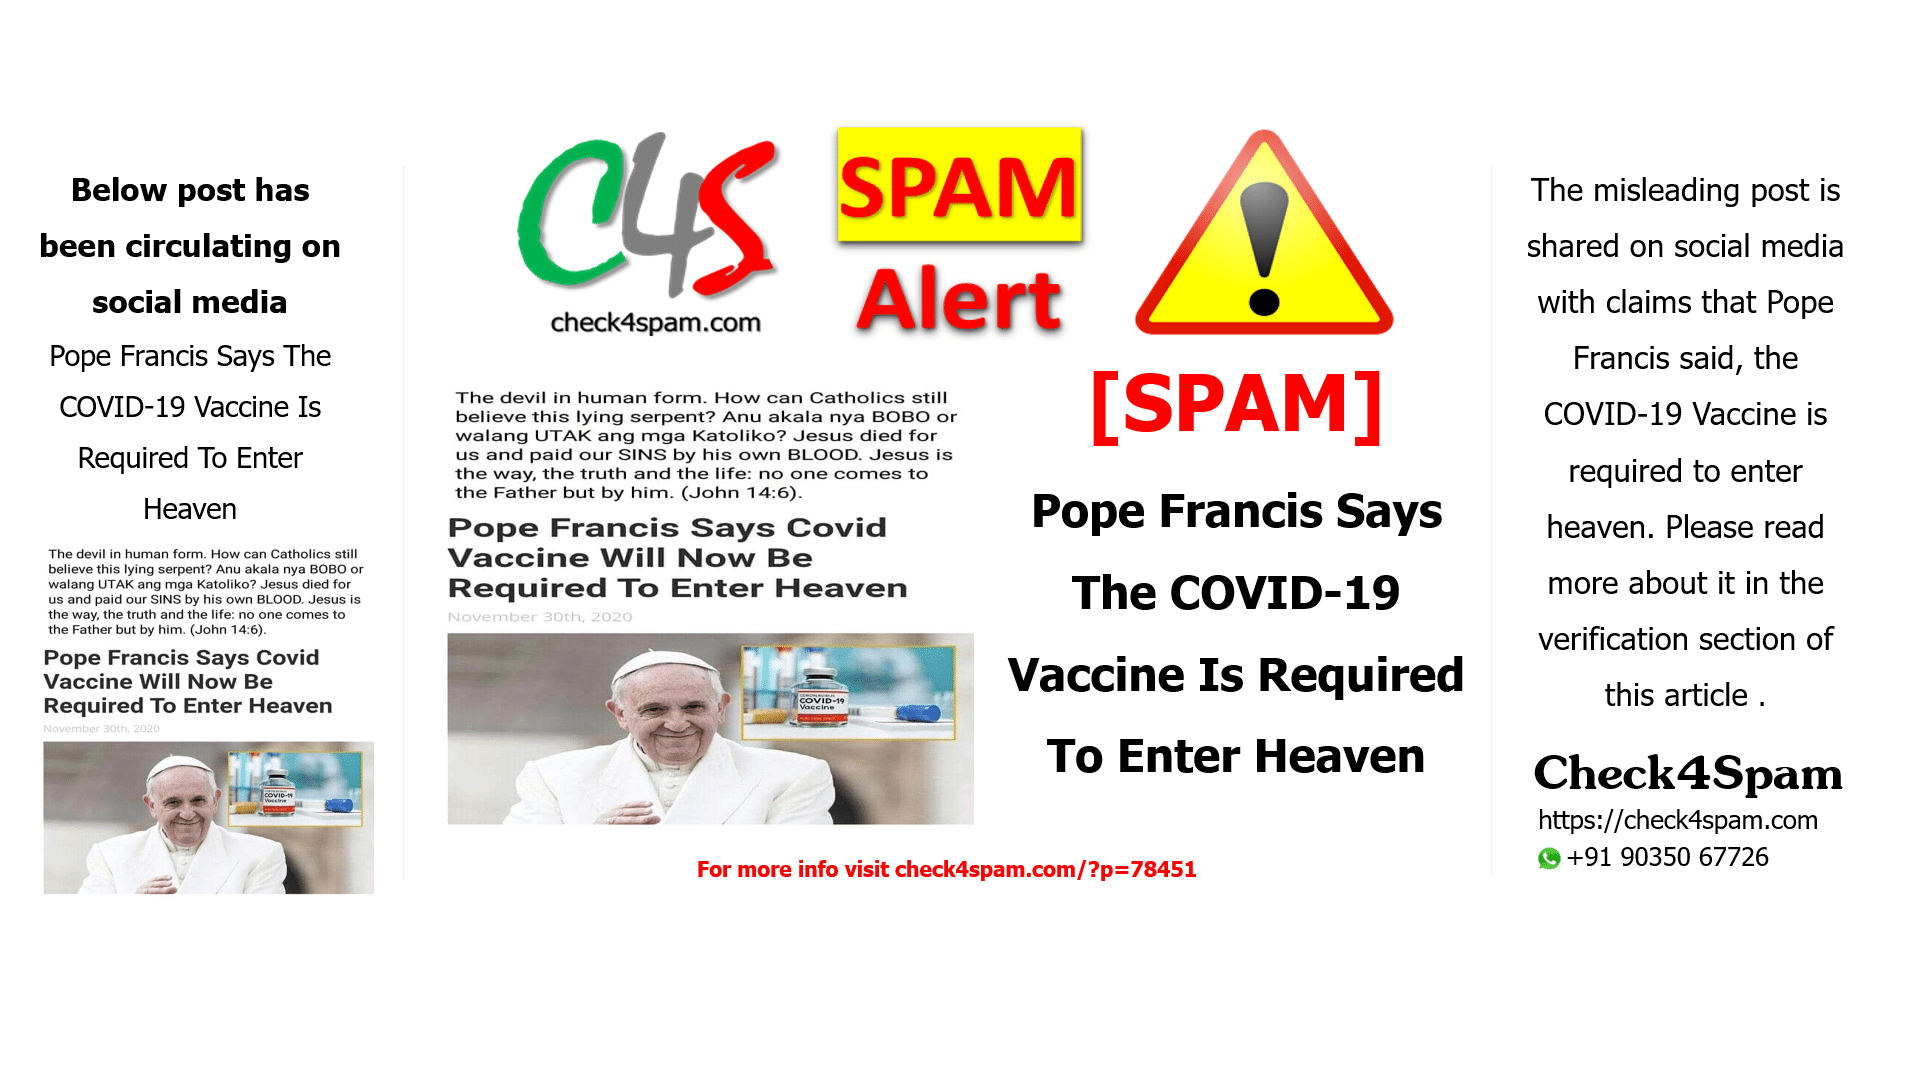 Pope Francis Says The COVID-19 Vaccine Is Required To Enter Heaven